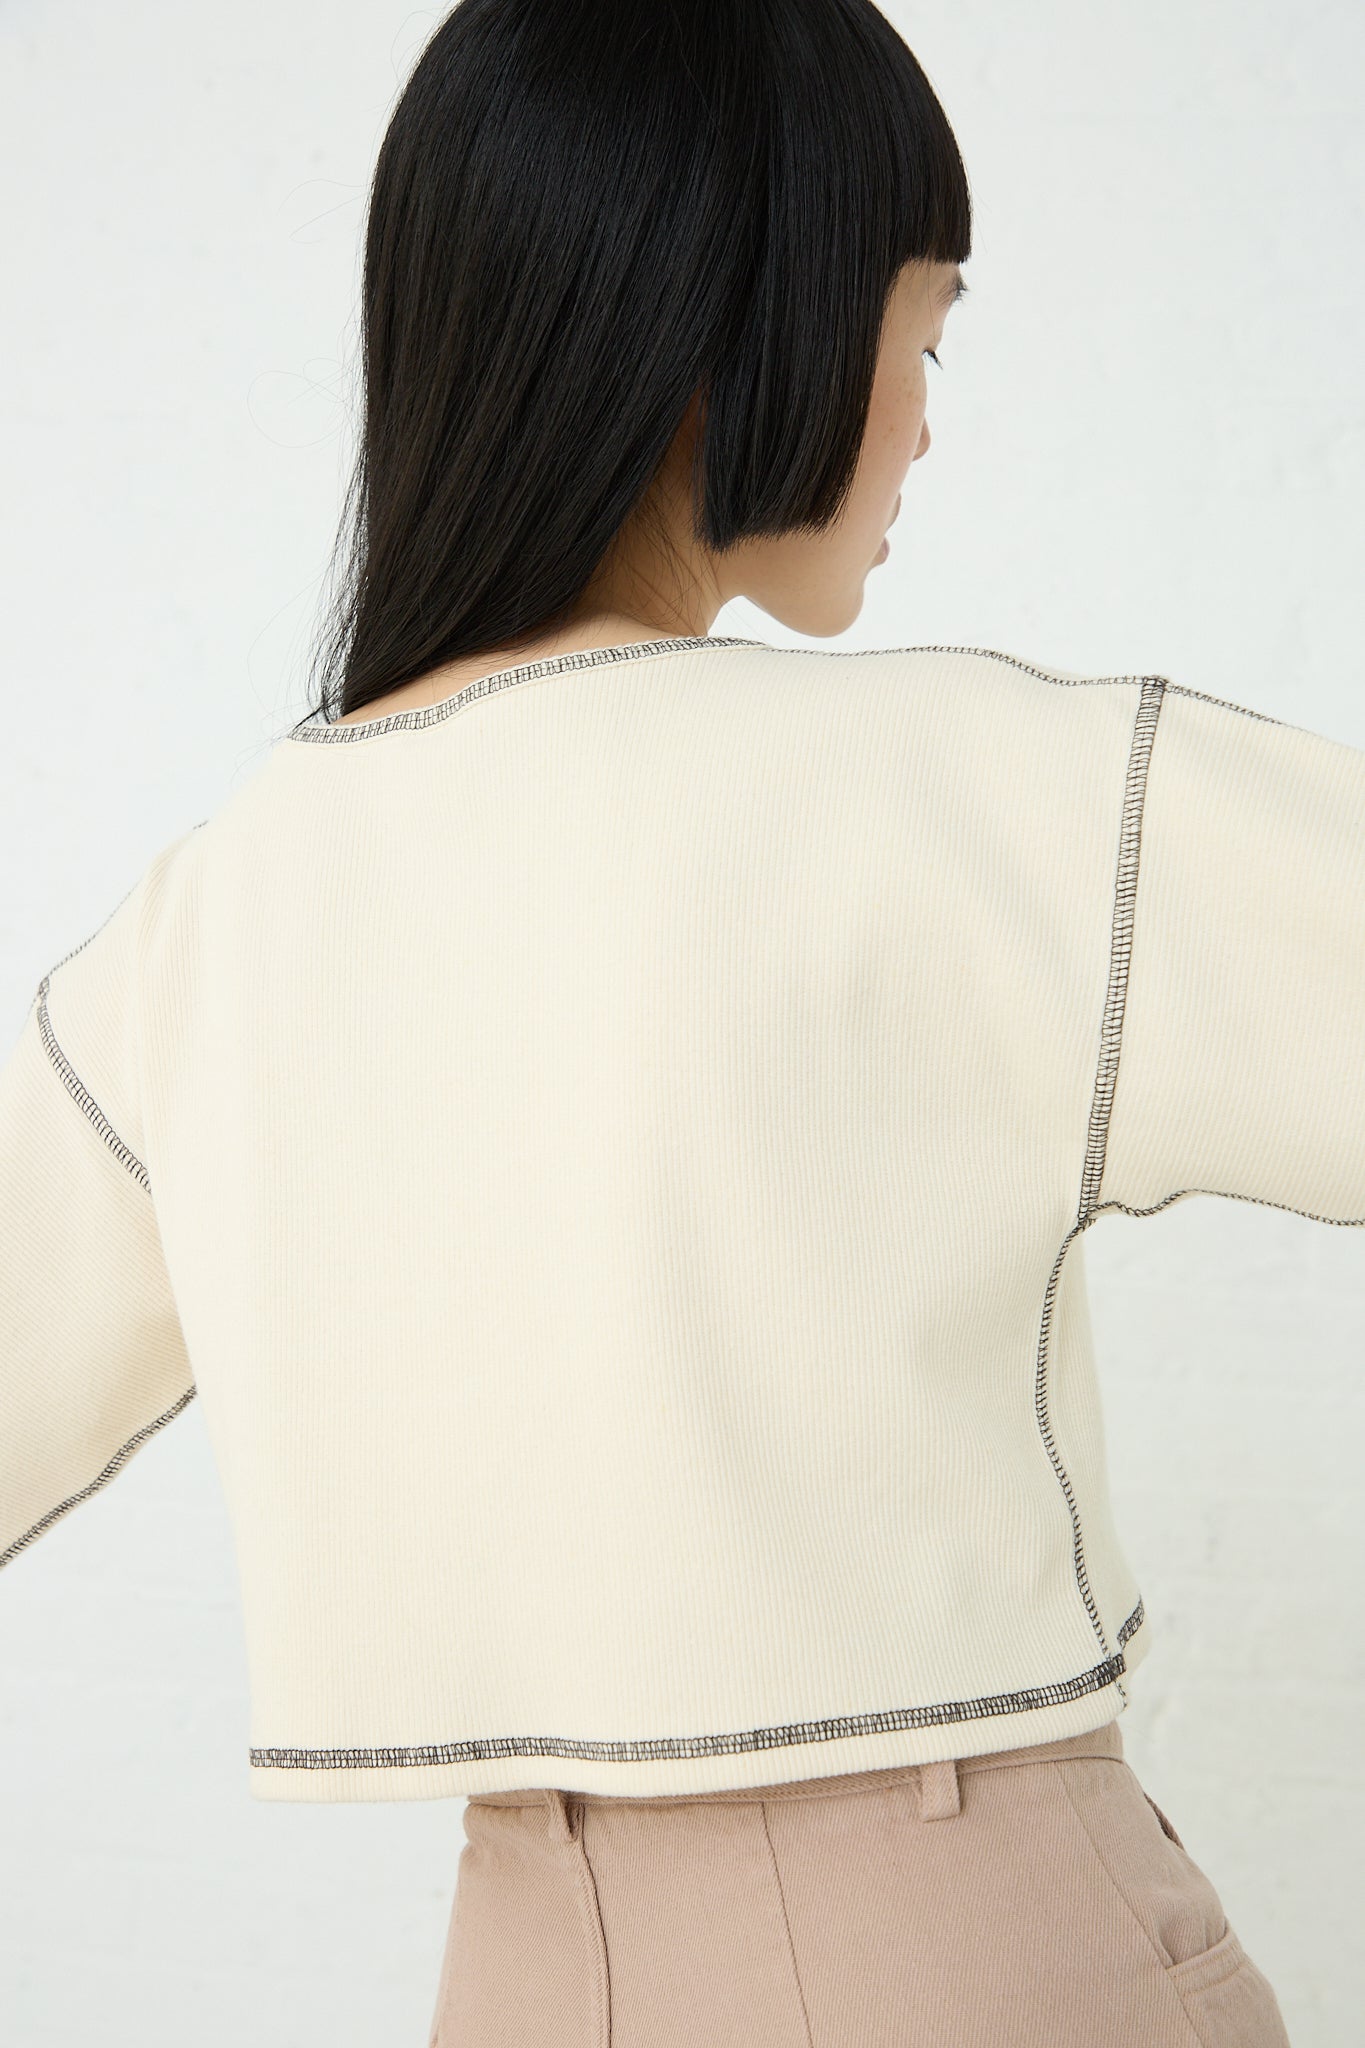 The back view of a woman wearing a Baserange Cotton Hemp Rib Garble Top in Undyed made from organic cotton blend.